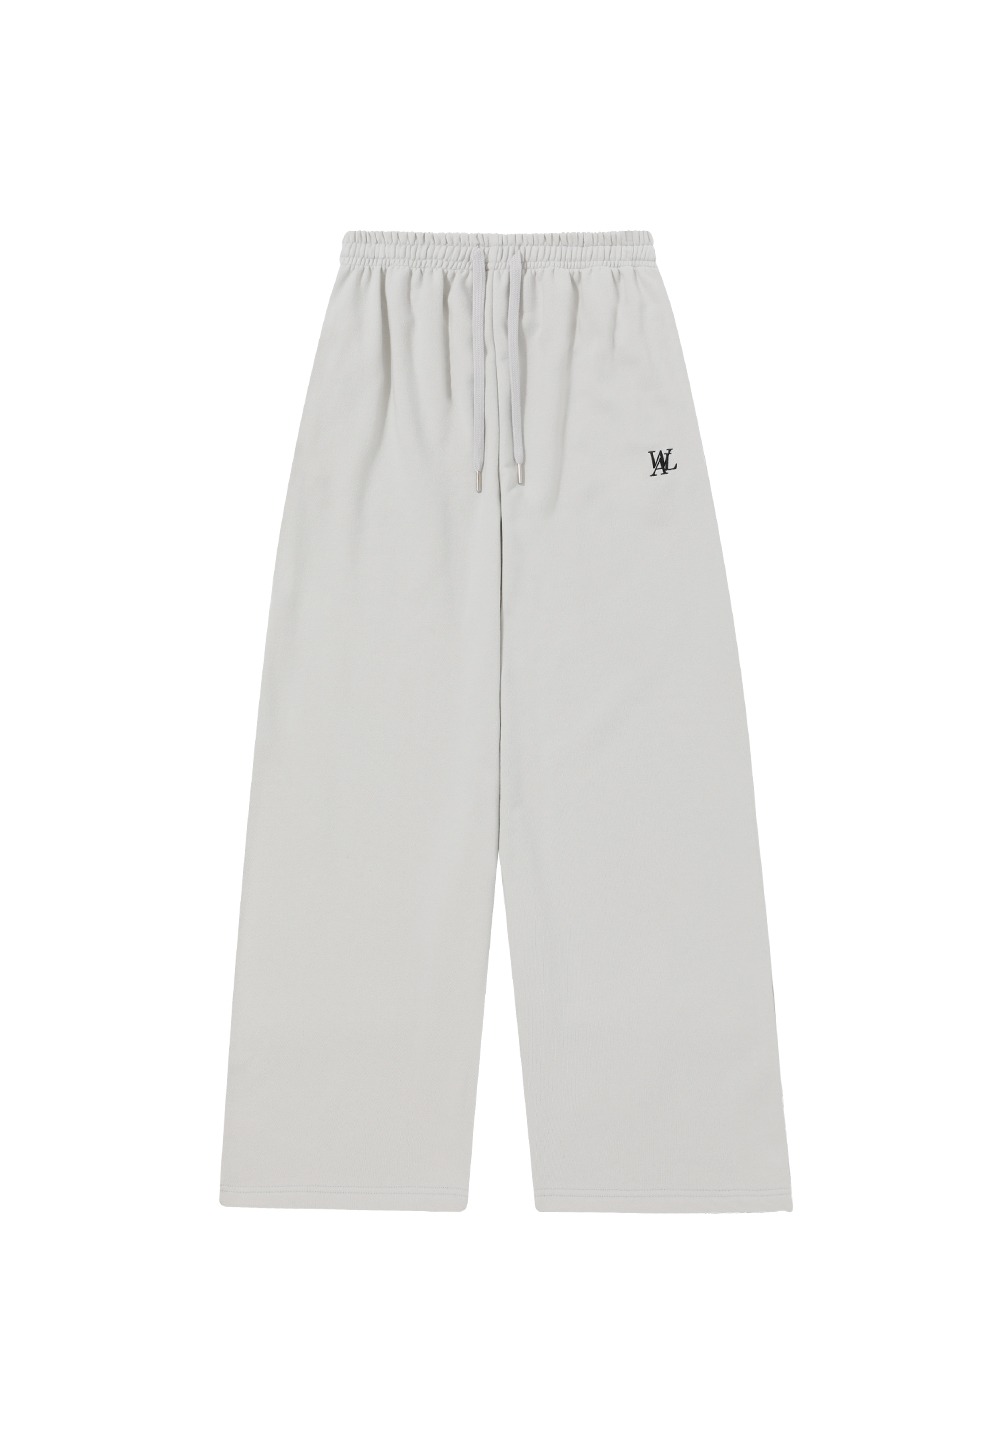 Signature relax wide pants - LIGHT GREY